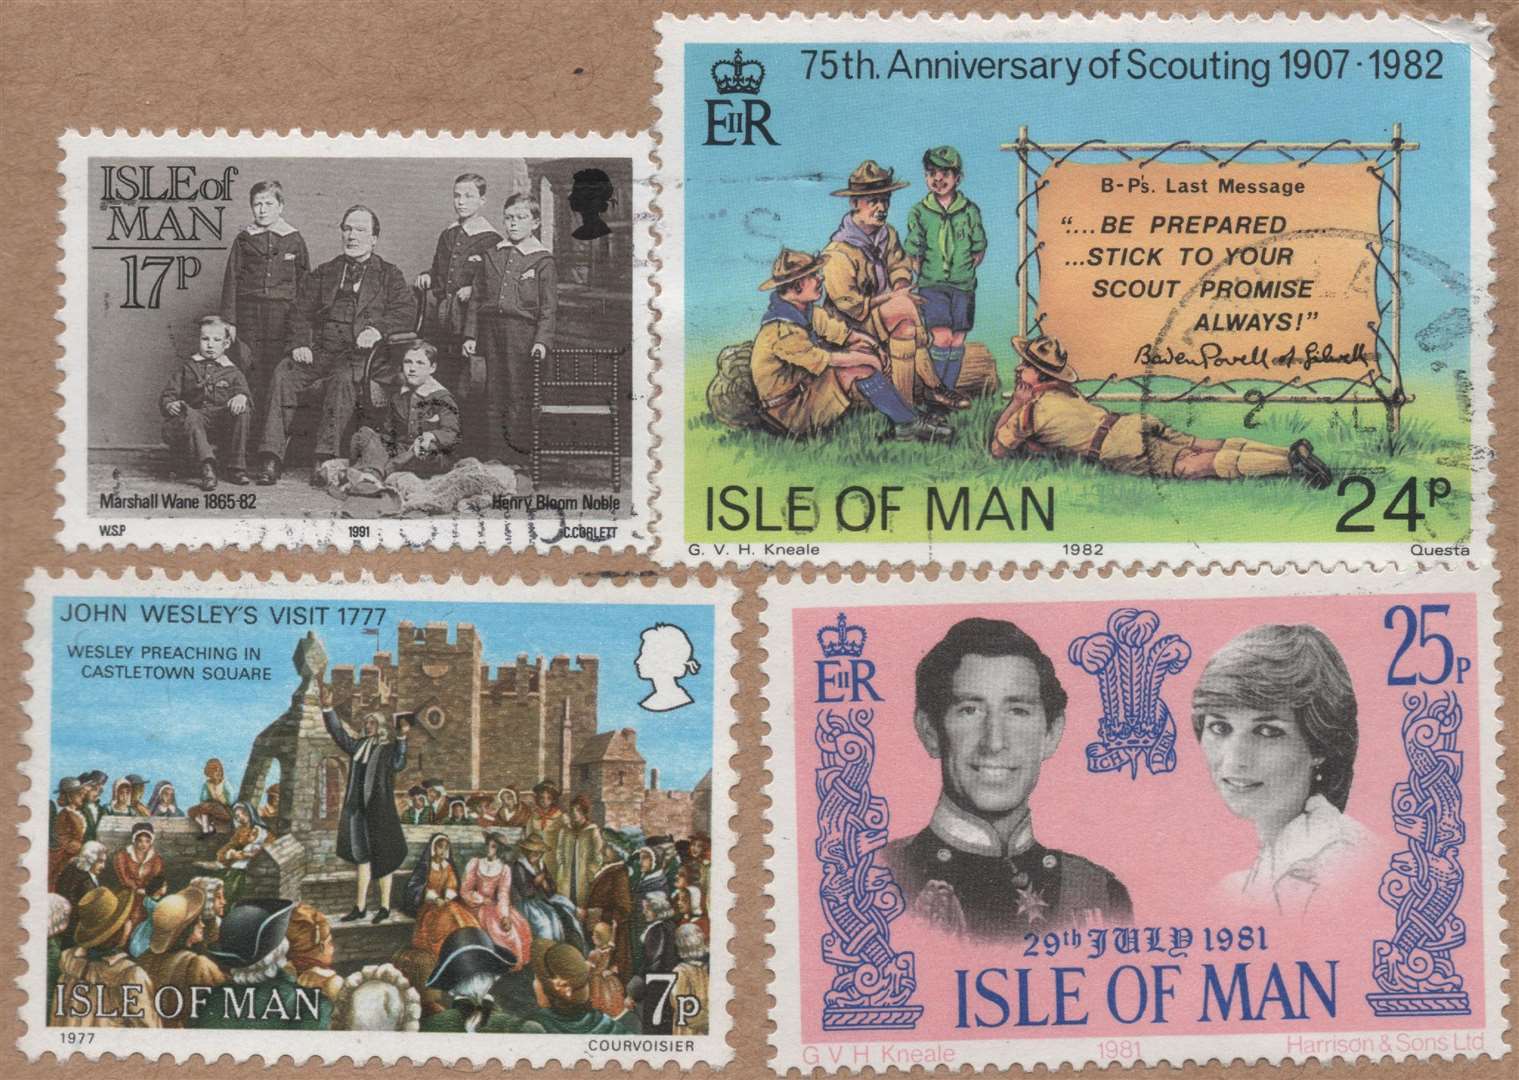 Commemorative first day covers could be purchased at post offices.